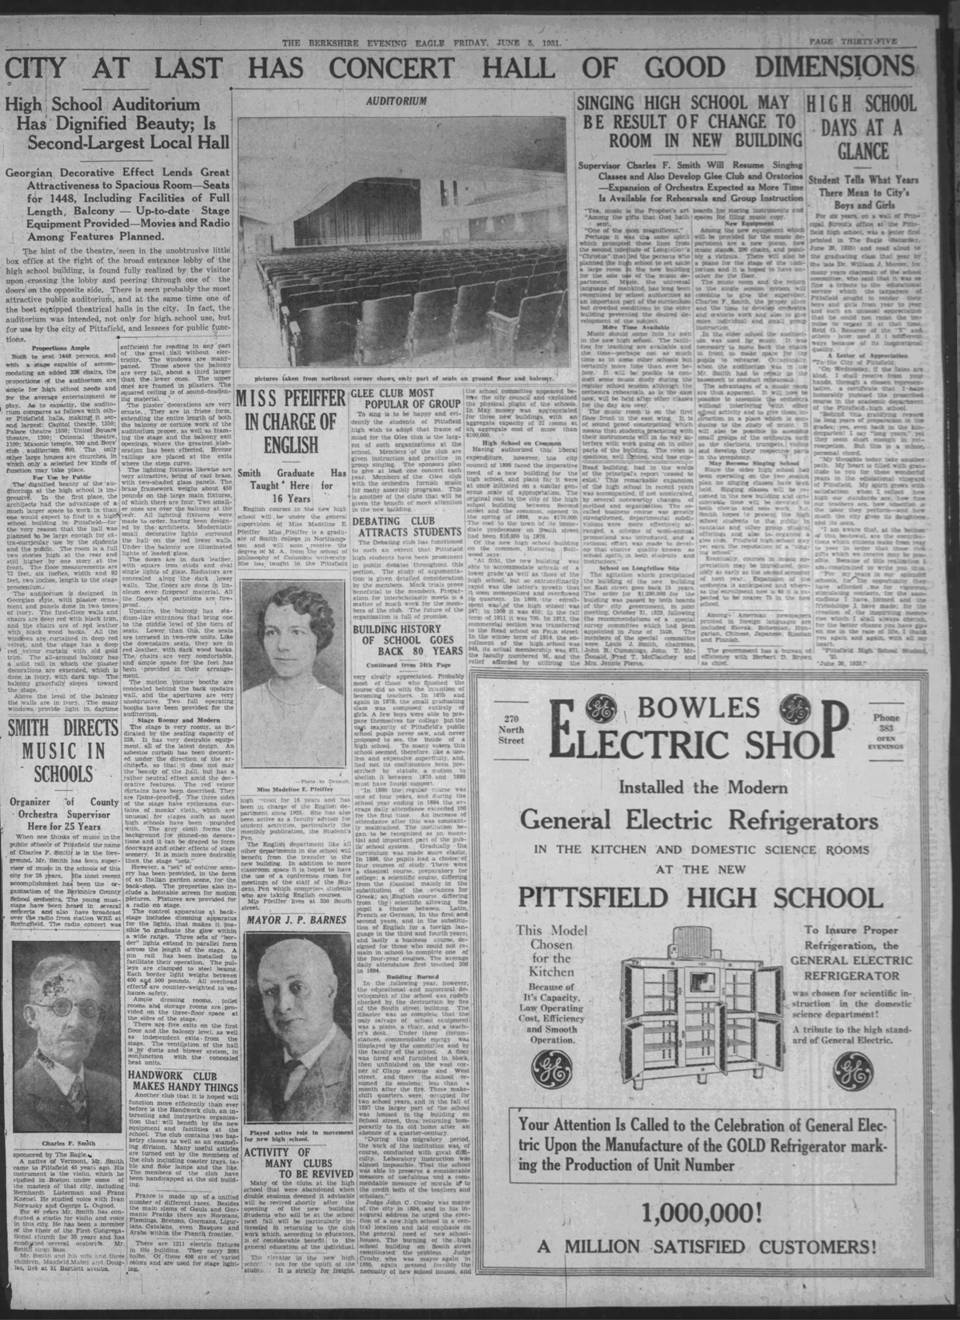 The_Berkshire_Eagle_1931_06_05_page_35.jpg